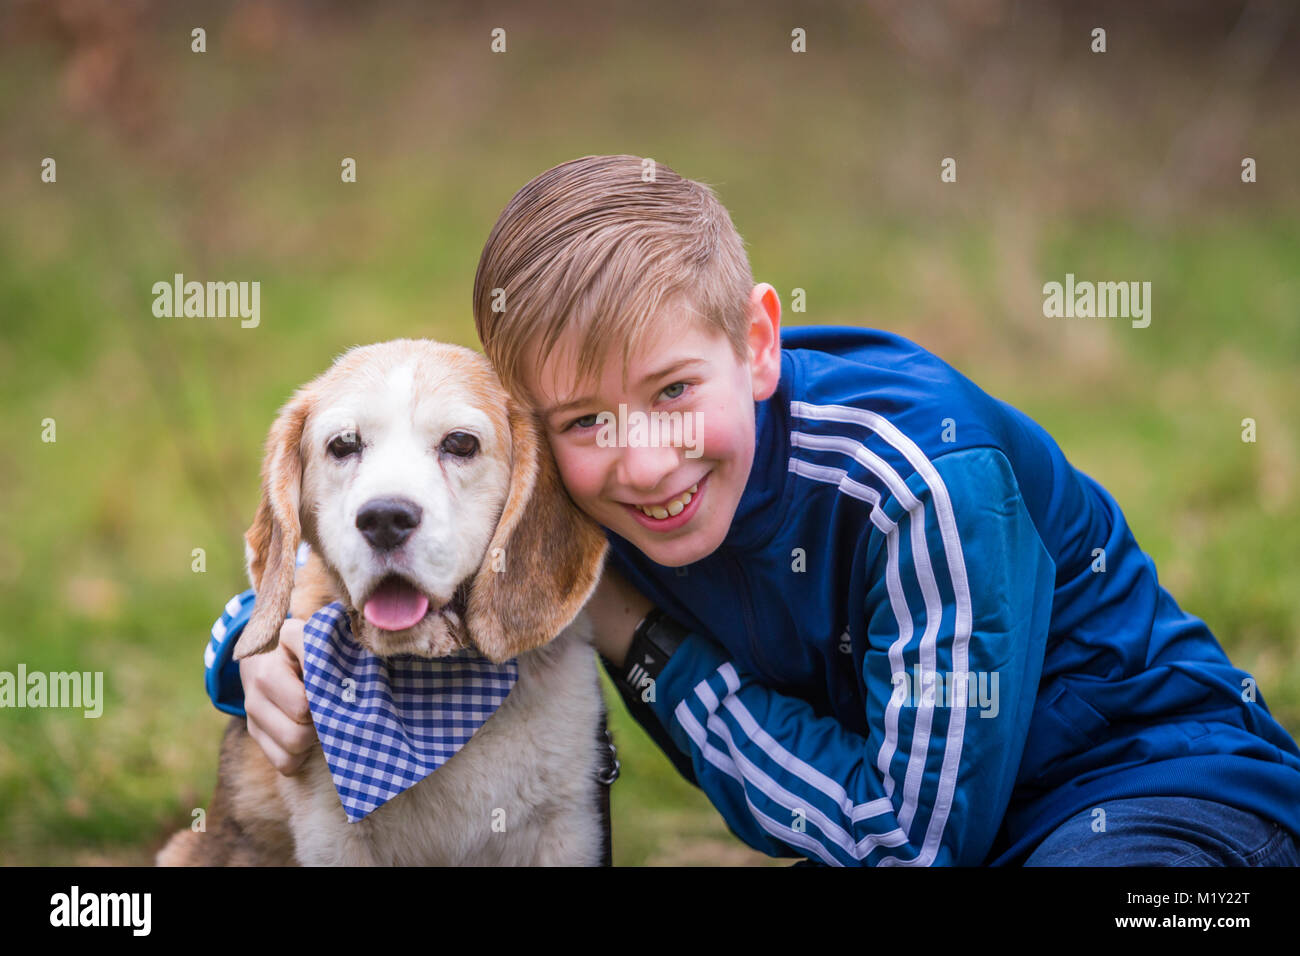 Young boy or youth with his pet beagle dog in a park Stock Photo